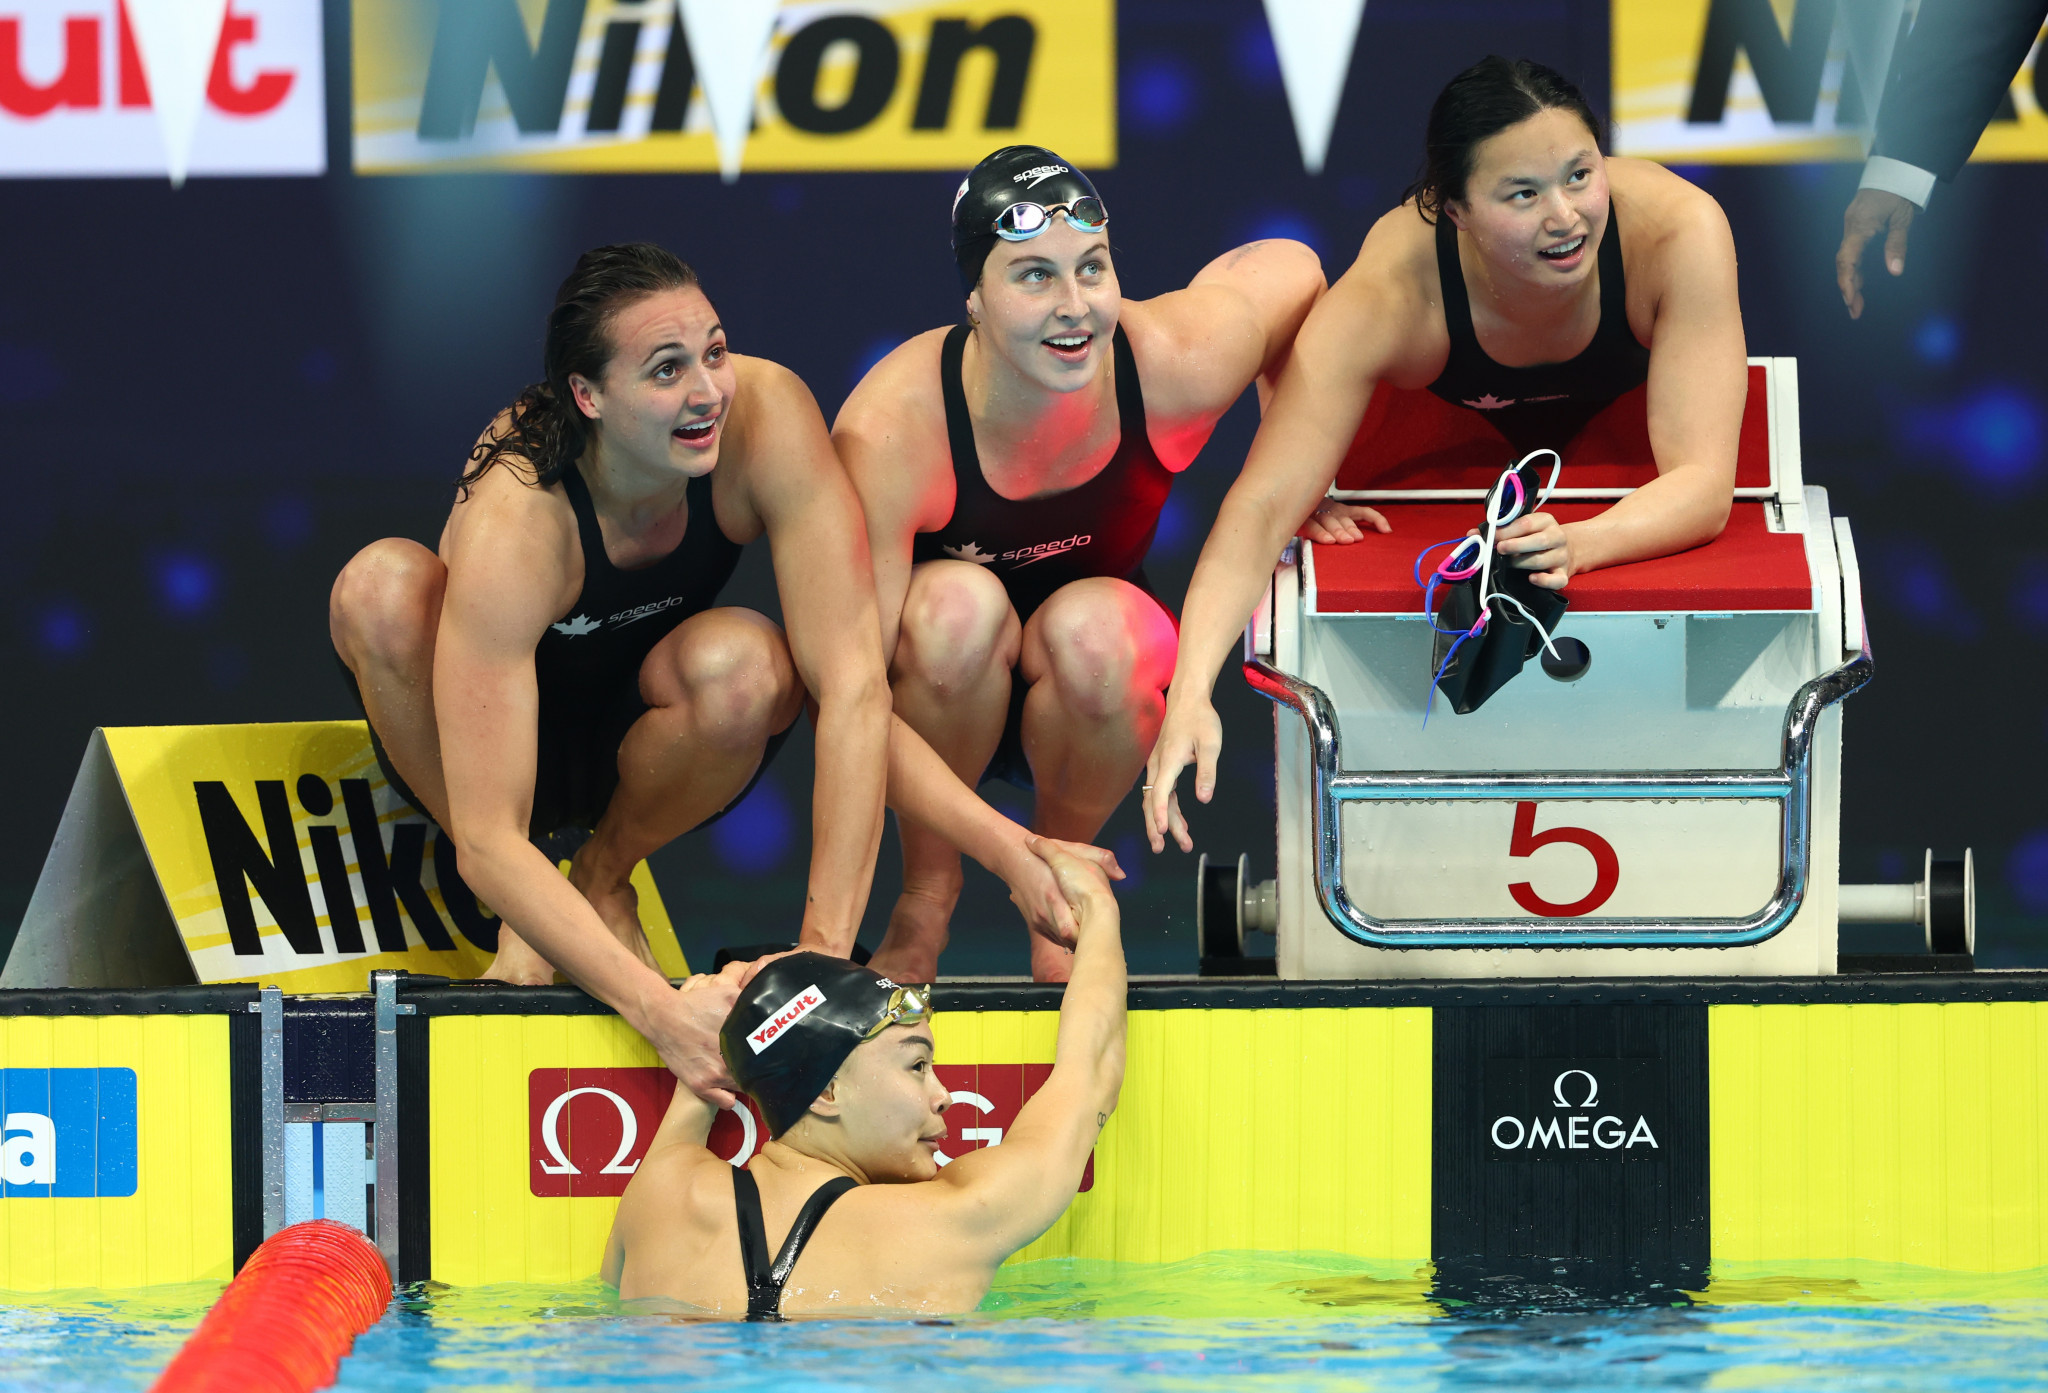 The Canadian team claimed silver in the women's 4x100m medley relay ©Getty Images